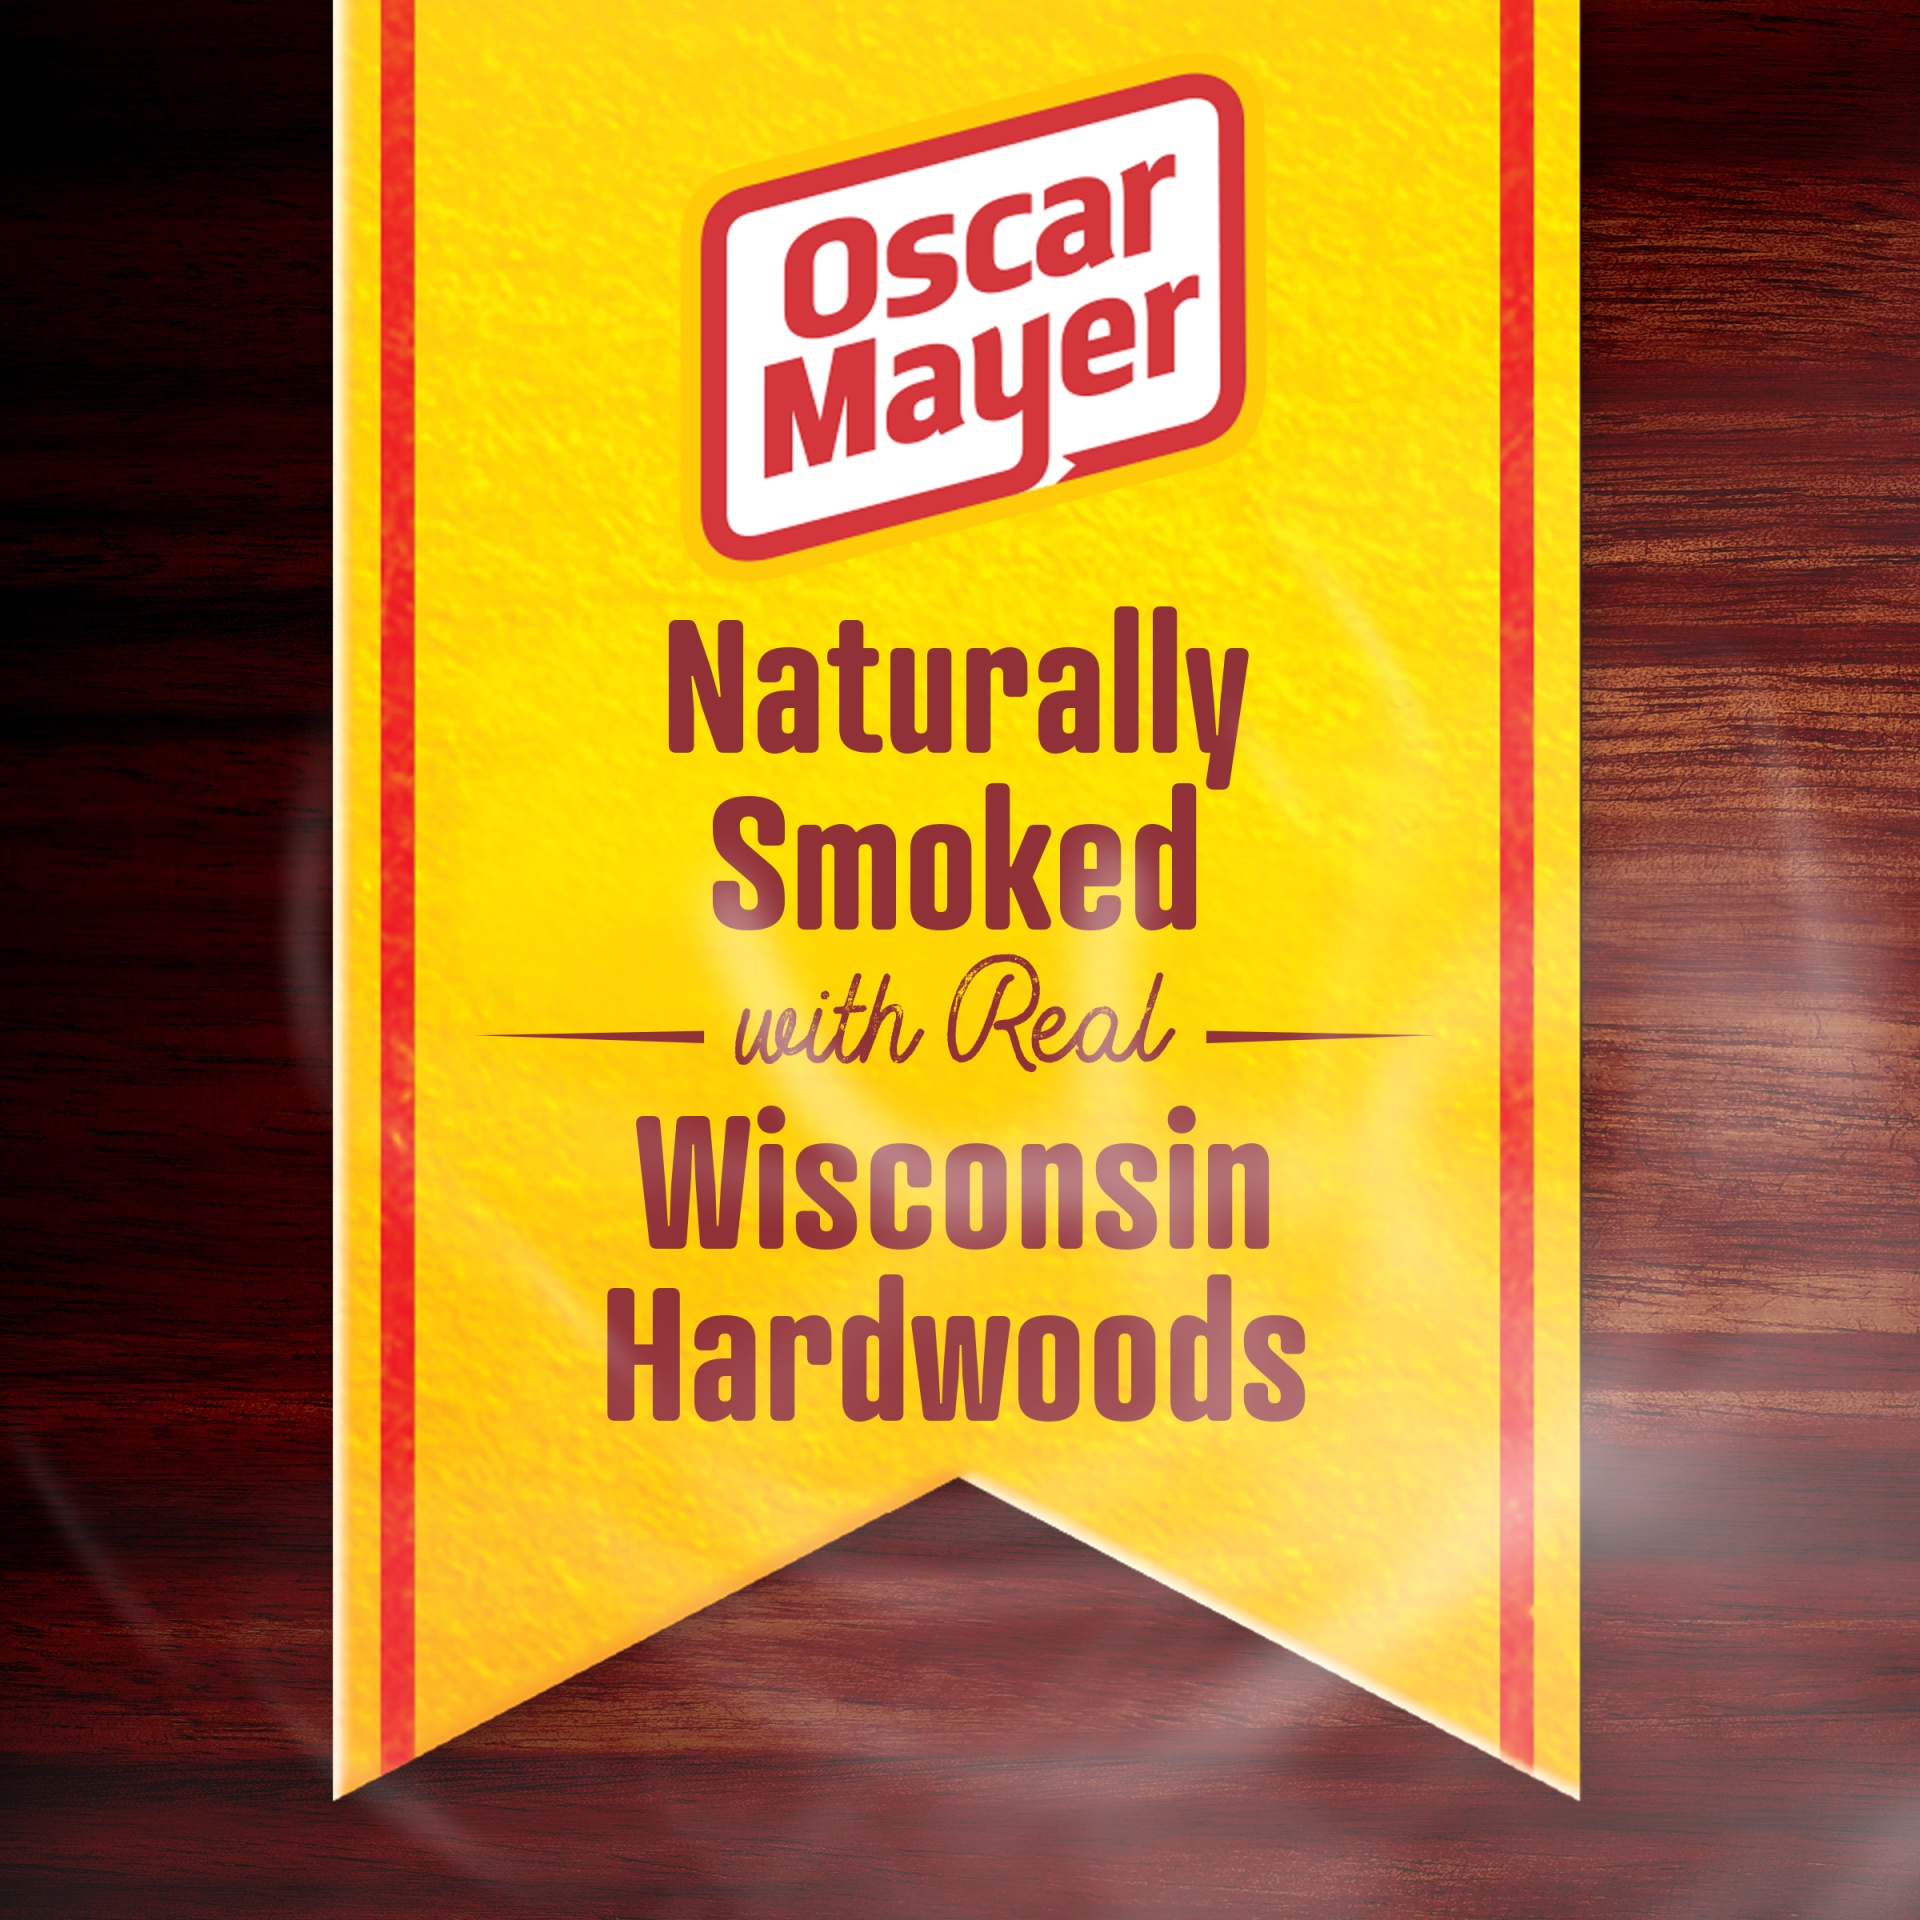 slide 5 of 12, Oscar Mayer Naturally Hardwood Smoked Thick Cut Bacon Pack, 11-13 slices, 16 oz